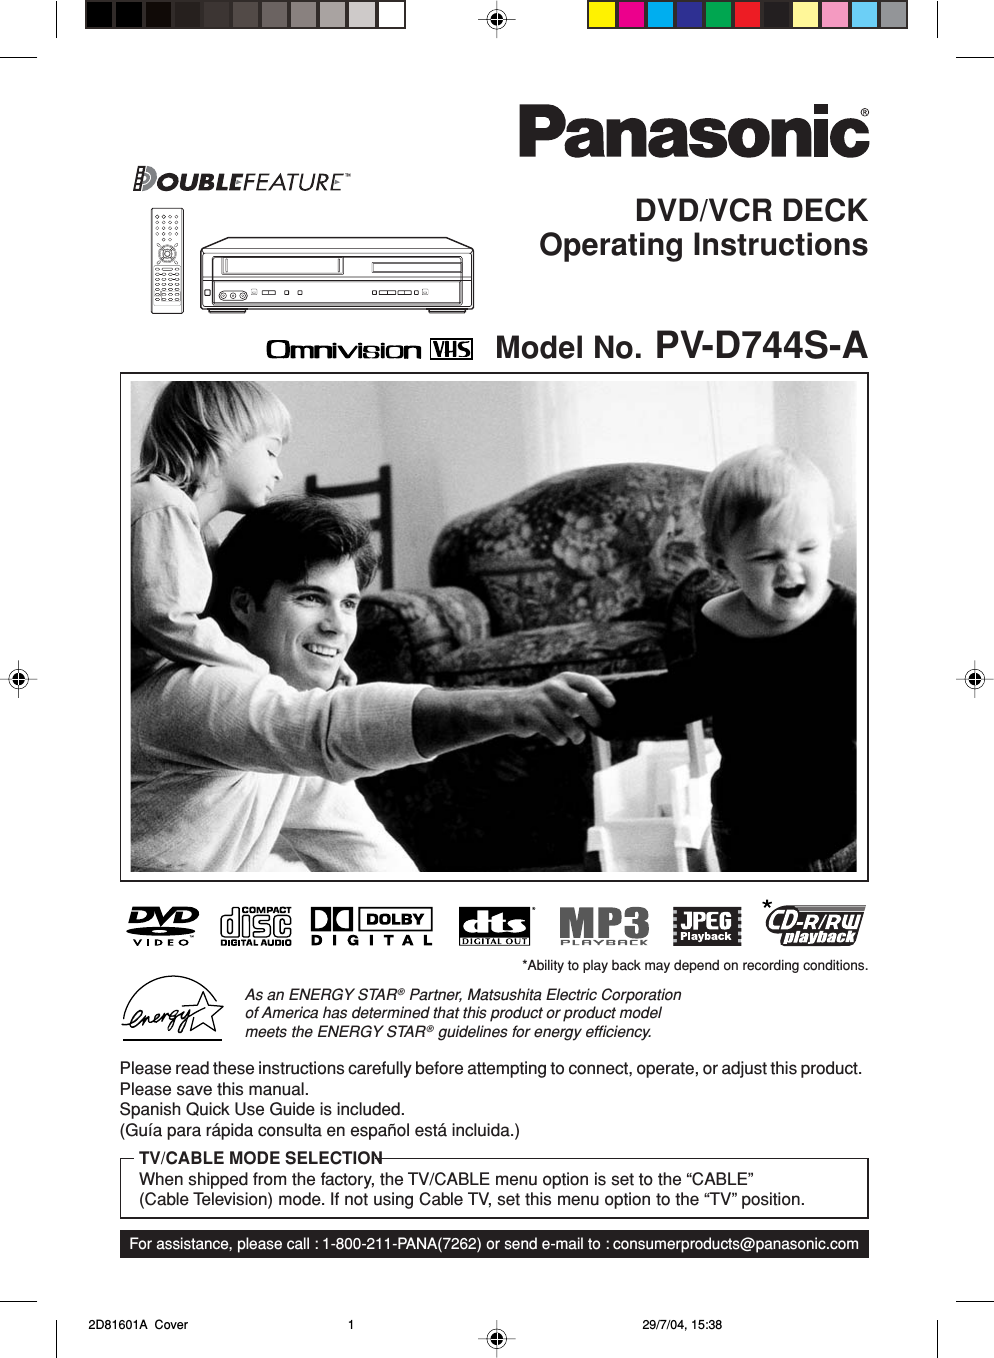 DVD/VCR DECKOperating InstructionsModel No. PV-D744S-AFor assistance, please call : 1-800-211-PANA(7262) or send e-mail to : consumerproducts@panasonic.comPlease read these instructions carefully before attempting to connect, operate, or adjust this product.Please save this manual.Spanish Quick Use Guide is included.(Guía para rápida consulta en español está incluida.)TV/CABLE MODE SELECTIONWhen shipped from the factory, the TV/CABLE menu option is set to the “CABLE”(Cable Television) mode. If not using Cable TV, set this menu option to the “TV” position.As an ENERGY STAR® Partner, Matsushita Electric Corporationof America has determined that this product or product modelmeets the ENERGY STAR® guidelines for energy efﬁciency.*Ability to play back may depend on recording conditions. 2D81601A  Cover 29/7/04, 15:381